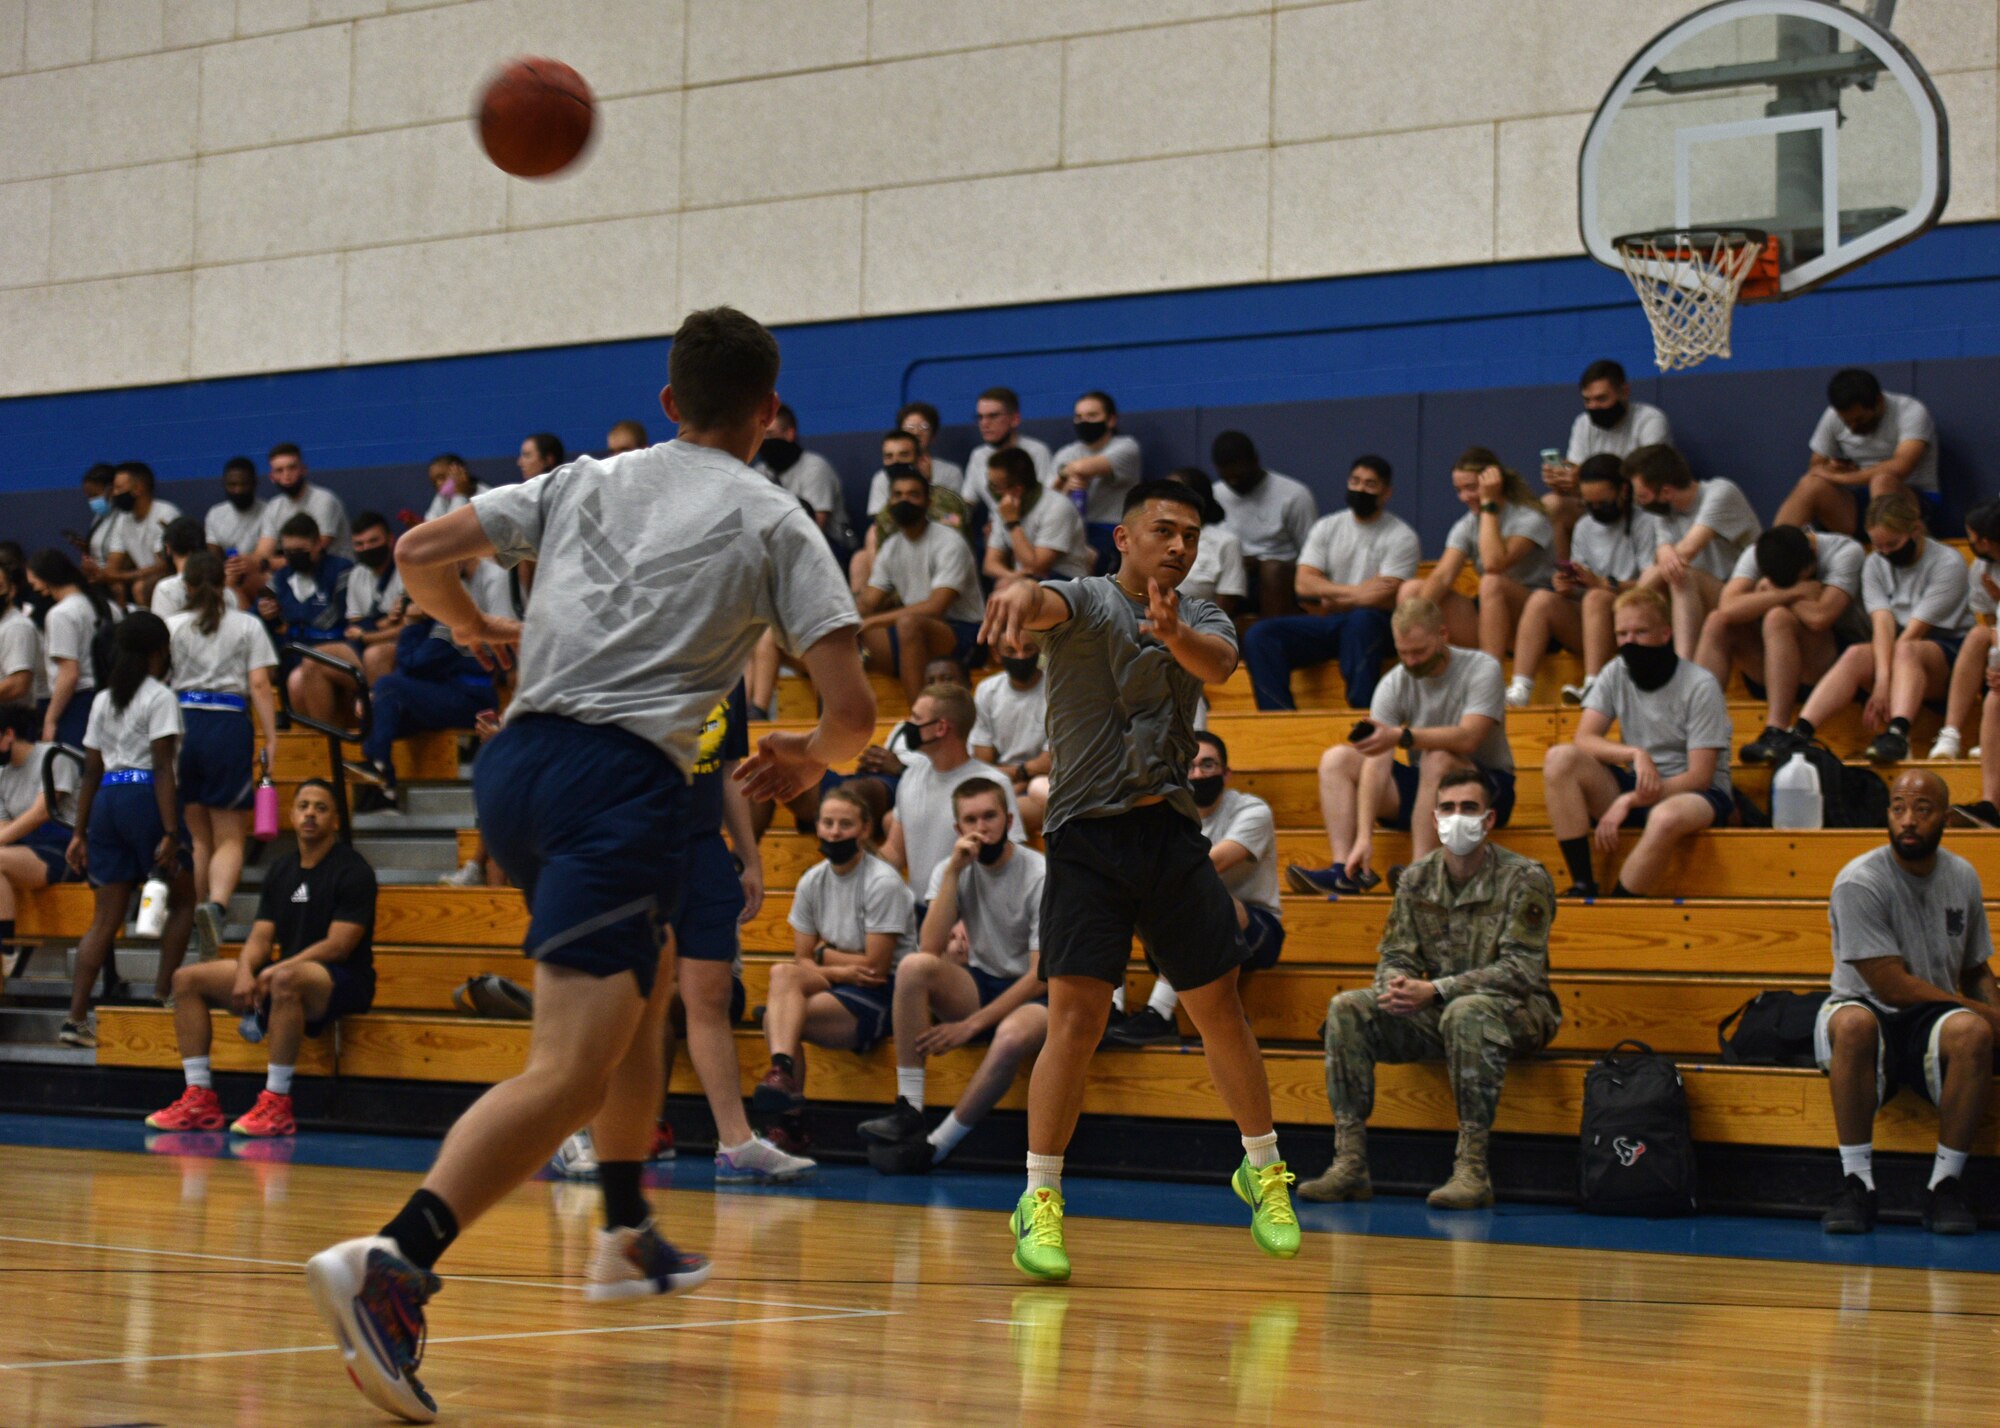 Members of the base community participate in a three versus three basketball game during Wing Sports Day on Goodfellow Air Force Base, Texas, Sept. 17, 2021. A total of 18 participants played in the basketball portion of the Wing Sports Day. (U.S. Air Force photo by Senior Airman Ashley Thrash)